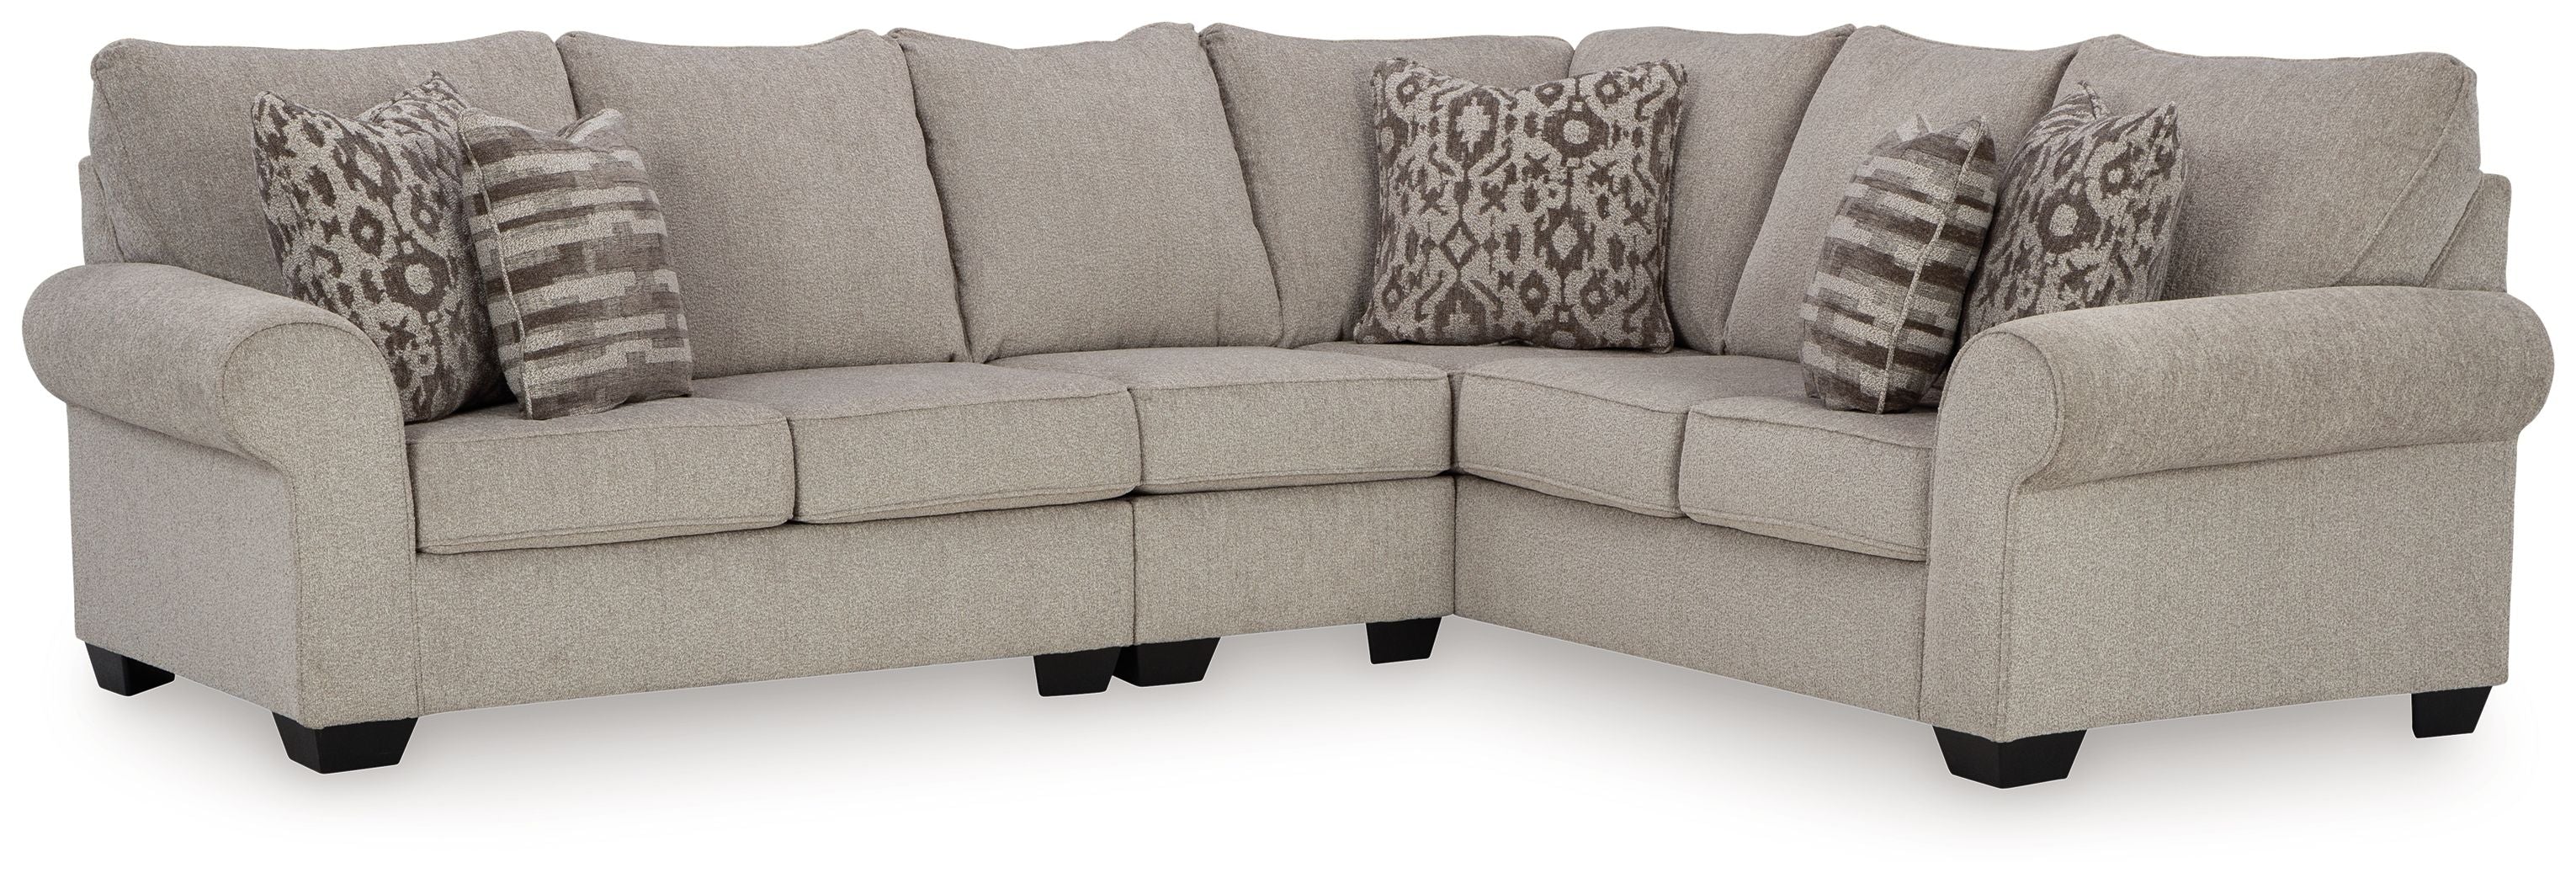 Claireah Farmhouse Fabric Brown Sectional-Stationary Sectionals-American Furniture Outlet